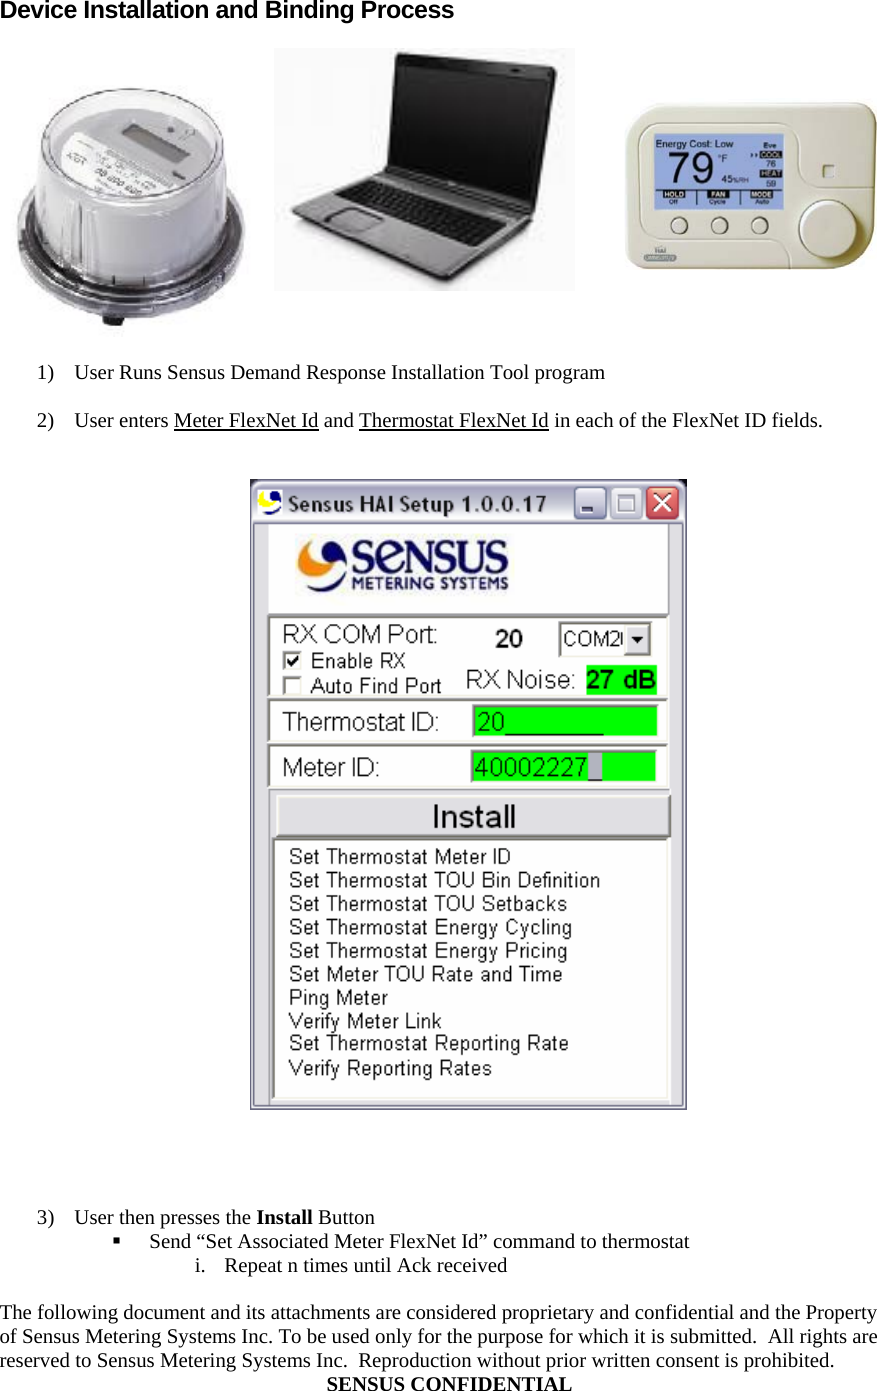  The following document and its attachments are considered proprietary and confidential and the Property of Sensus Metering Systems Inc. To be used only for the purpose for which it is submitted.  All rights are reserved to Sensus Metering Systems Inc.  Reproduction without prior written consent is prohibited. SENSUS CONFIDENTIAL  Device Installation and Binding Process   1) User Runs Sensus Demand Response Installation Tool program  2) User enters Meter FlexNet Id and Thermostat FlexNet Id in each of the FlexNet ID fields.        3) User then presses the Install Button  Send “Set Associated Meter FlexNet Id” command to thermostat i. Repeat n times until Ack received 